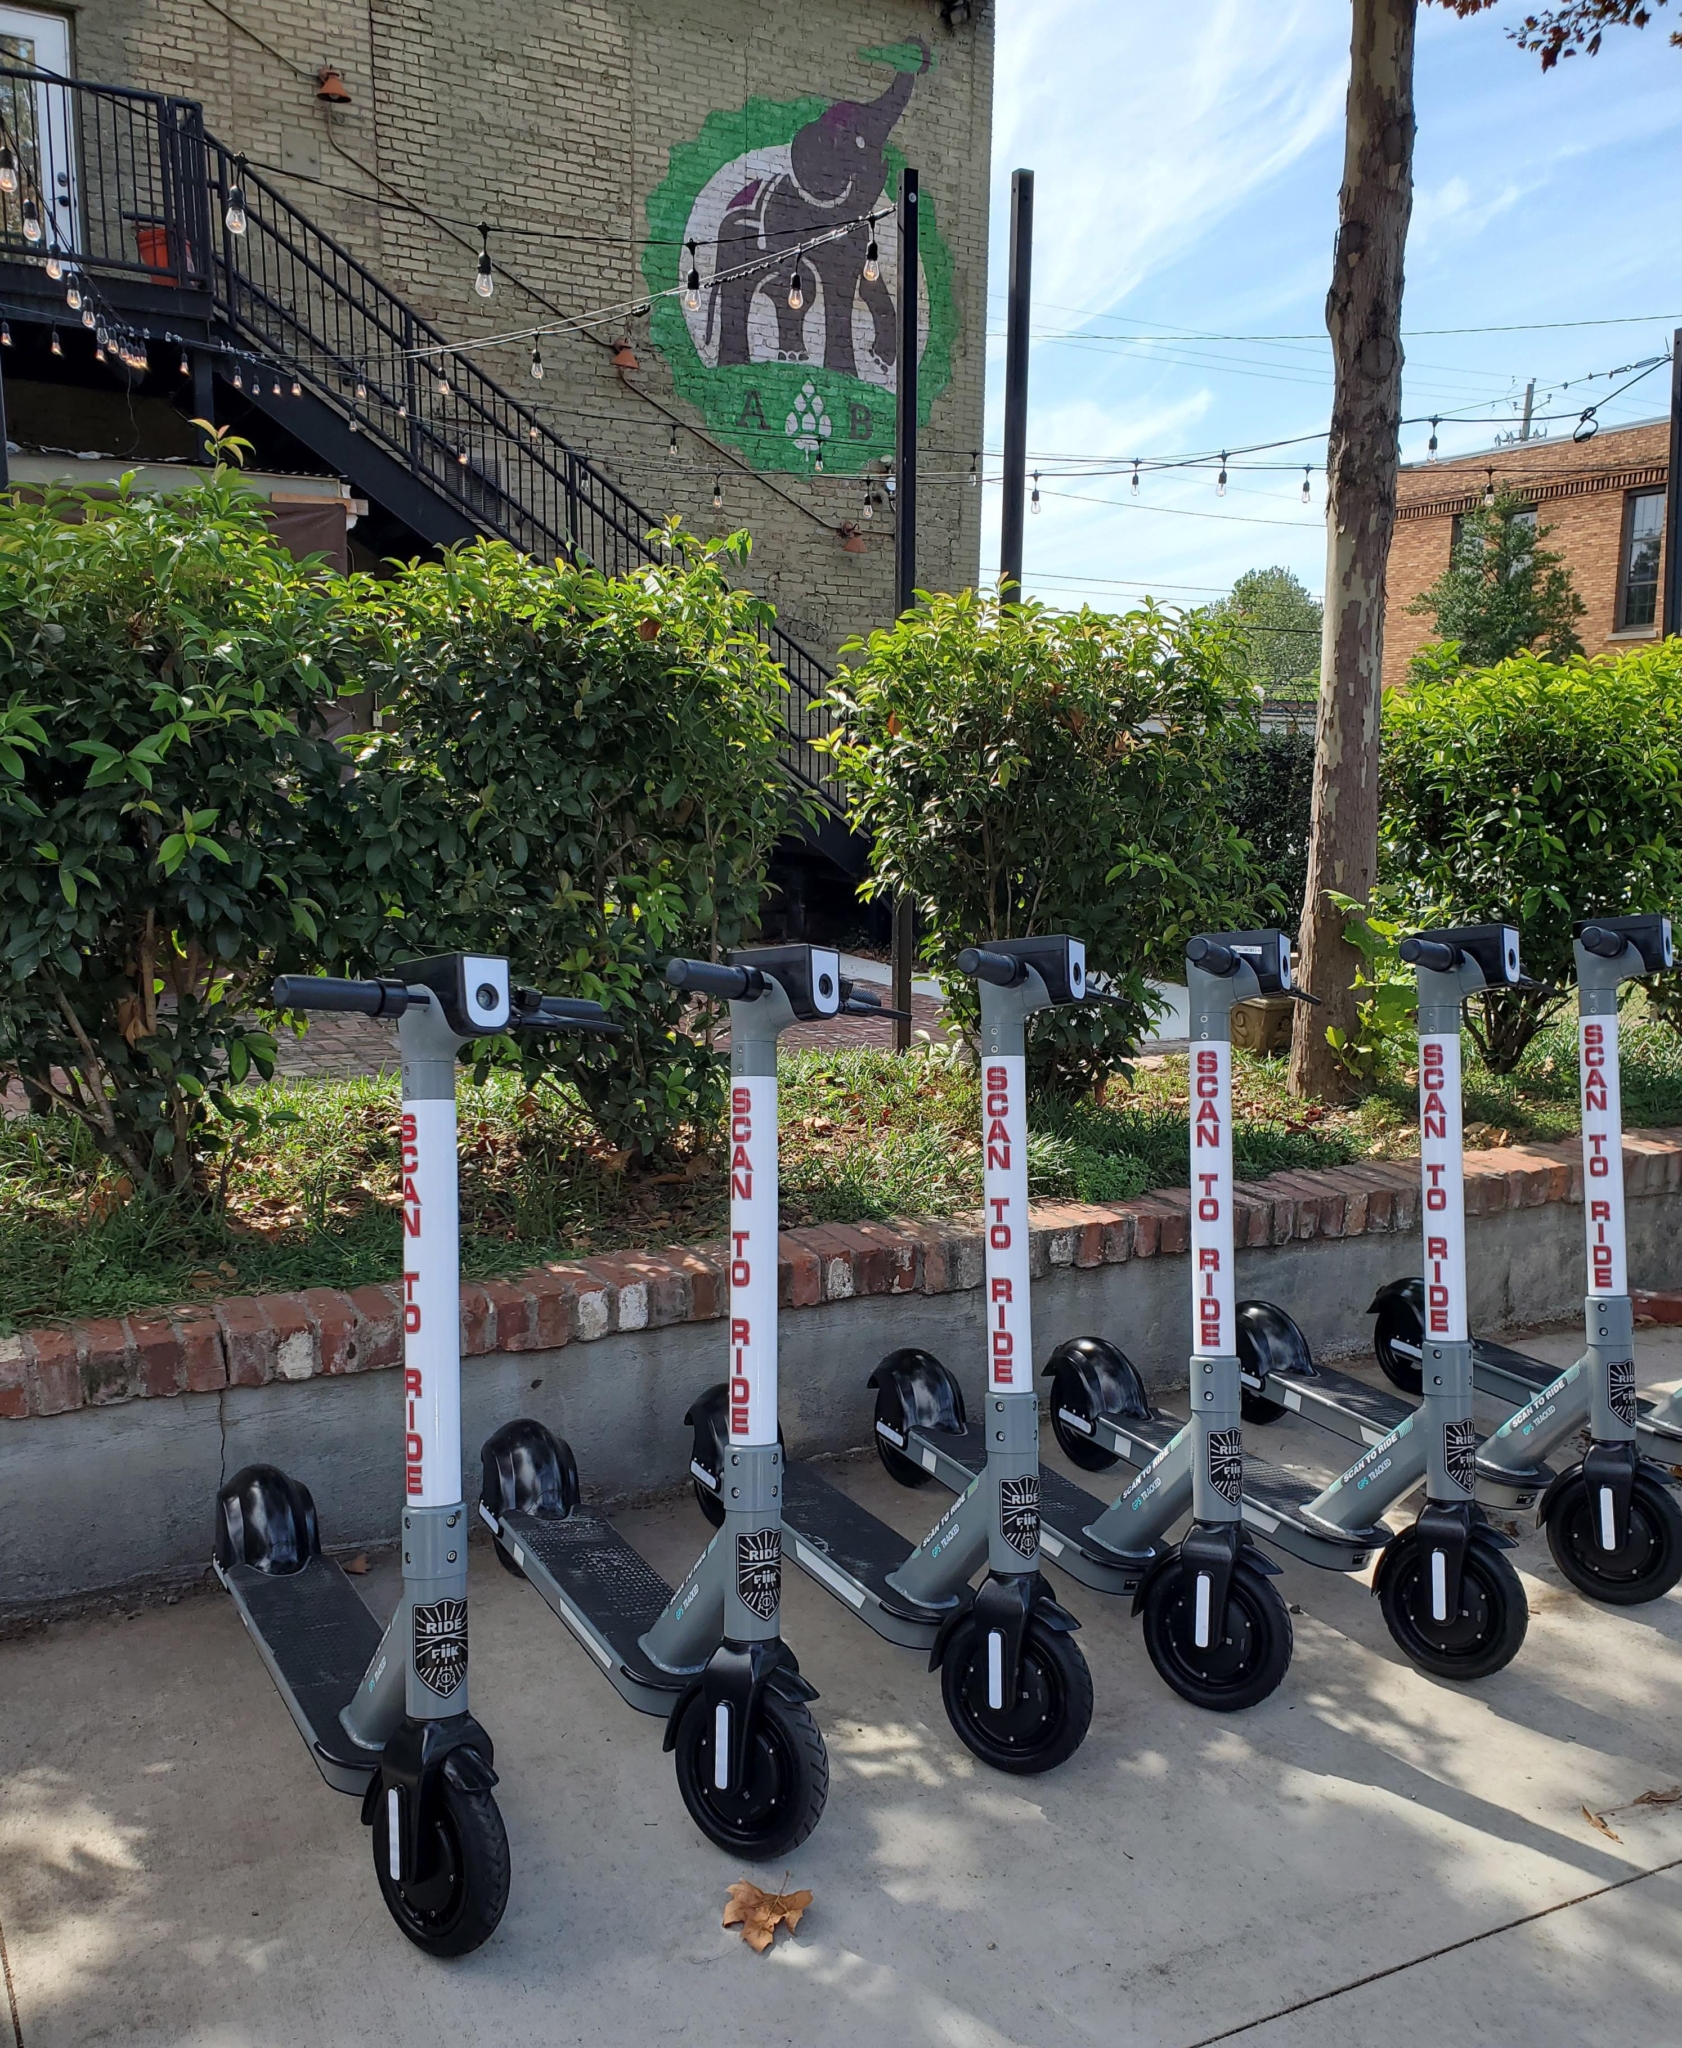 Scooters for rent outside of Avondale Brewery